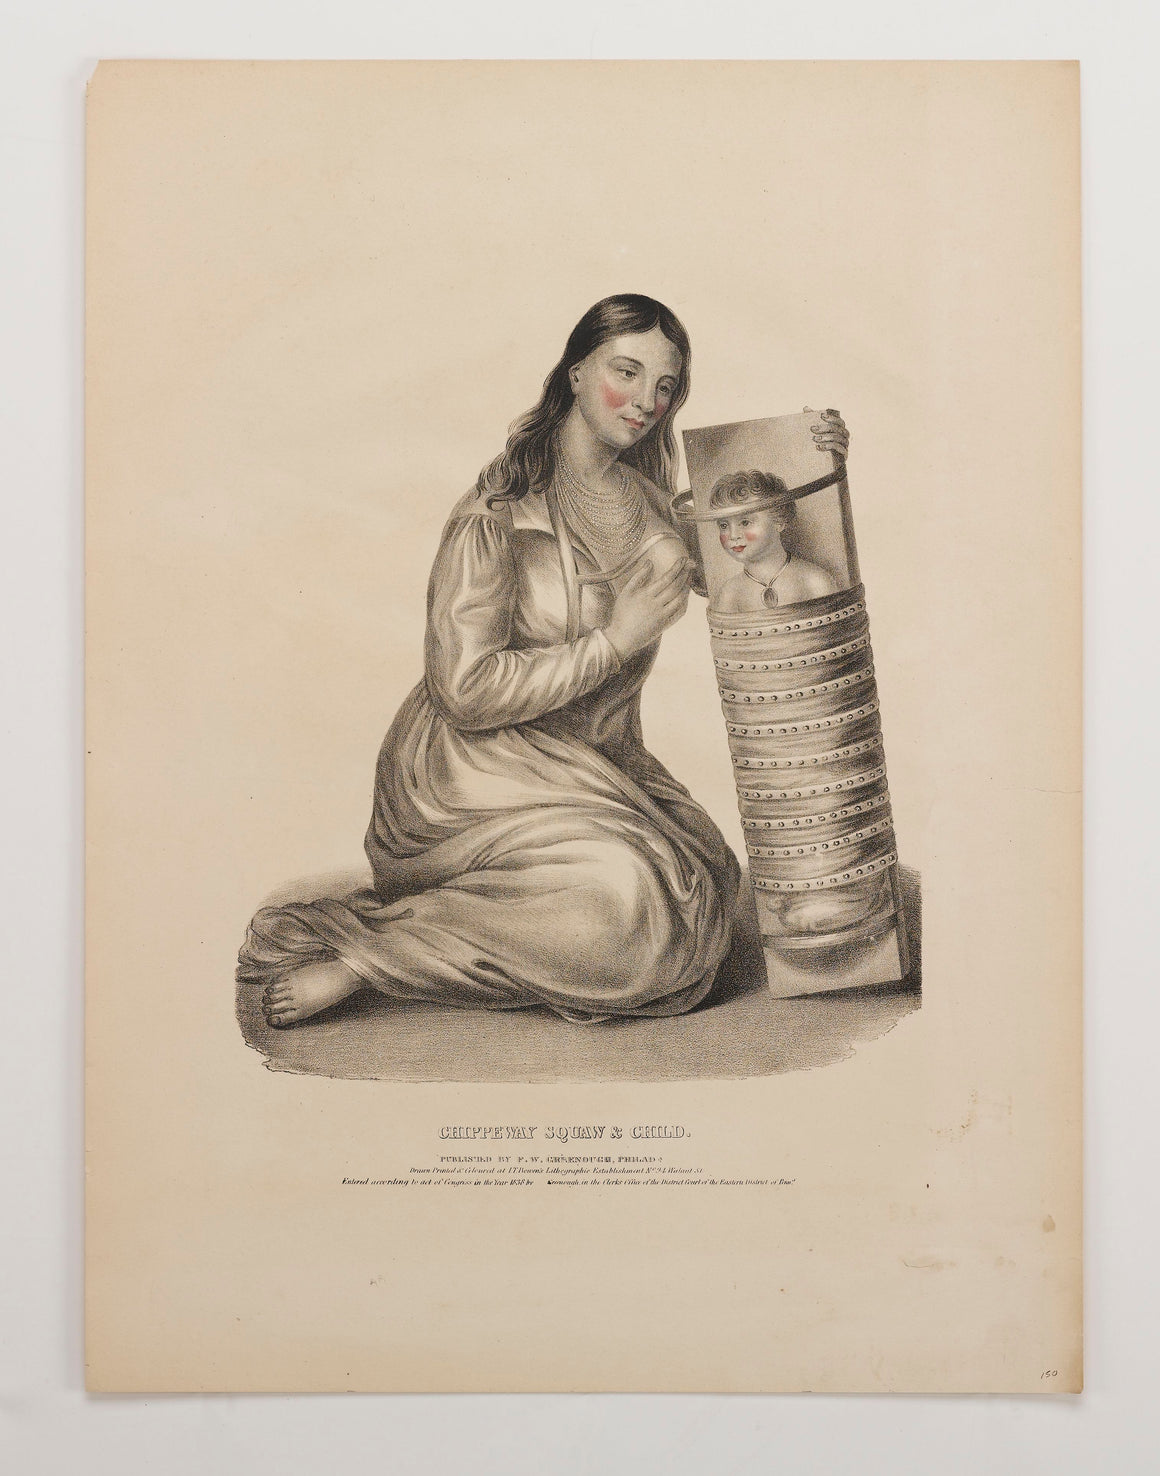 1838 Chippeway Squaw & Child Hand-Colored Lithograph